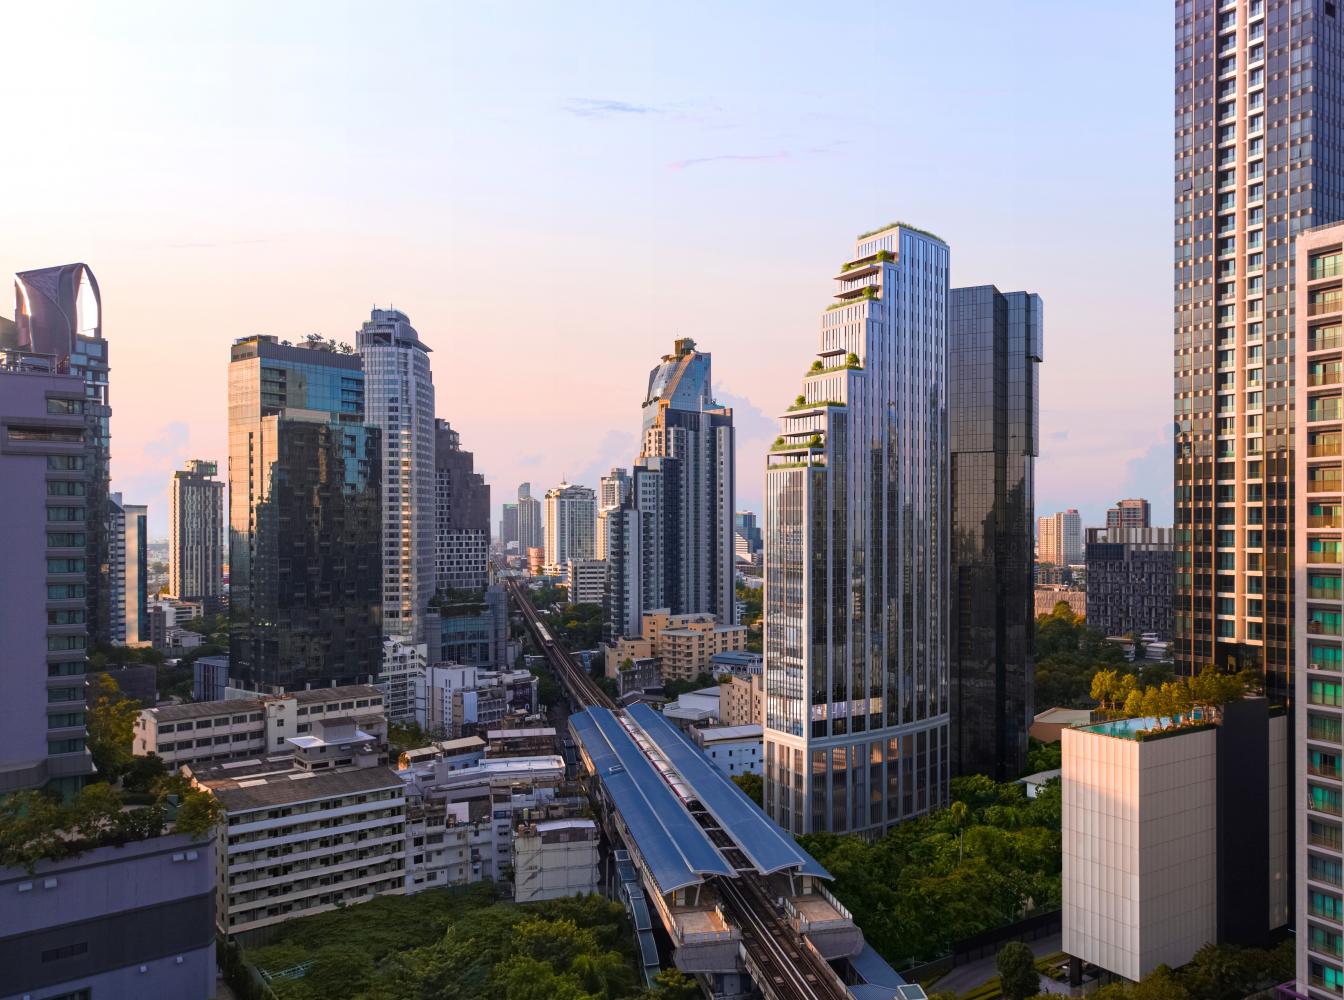 Scope poised to roll out B3bn condo project in Sukhumvit